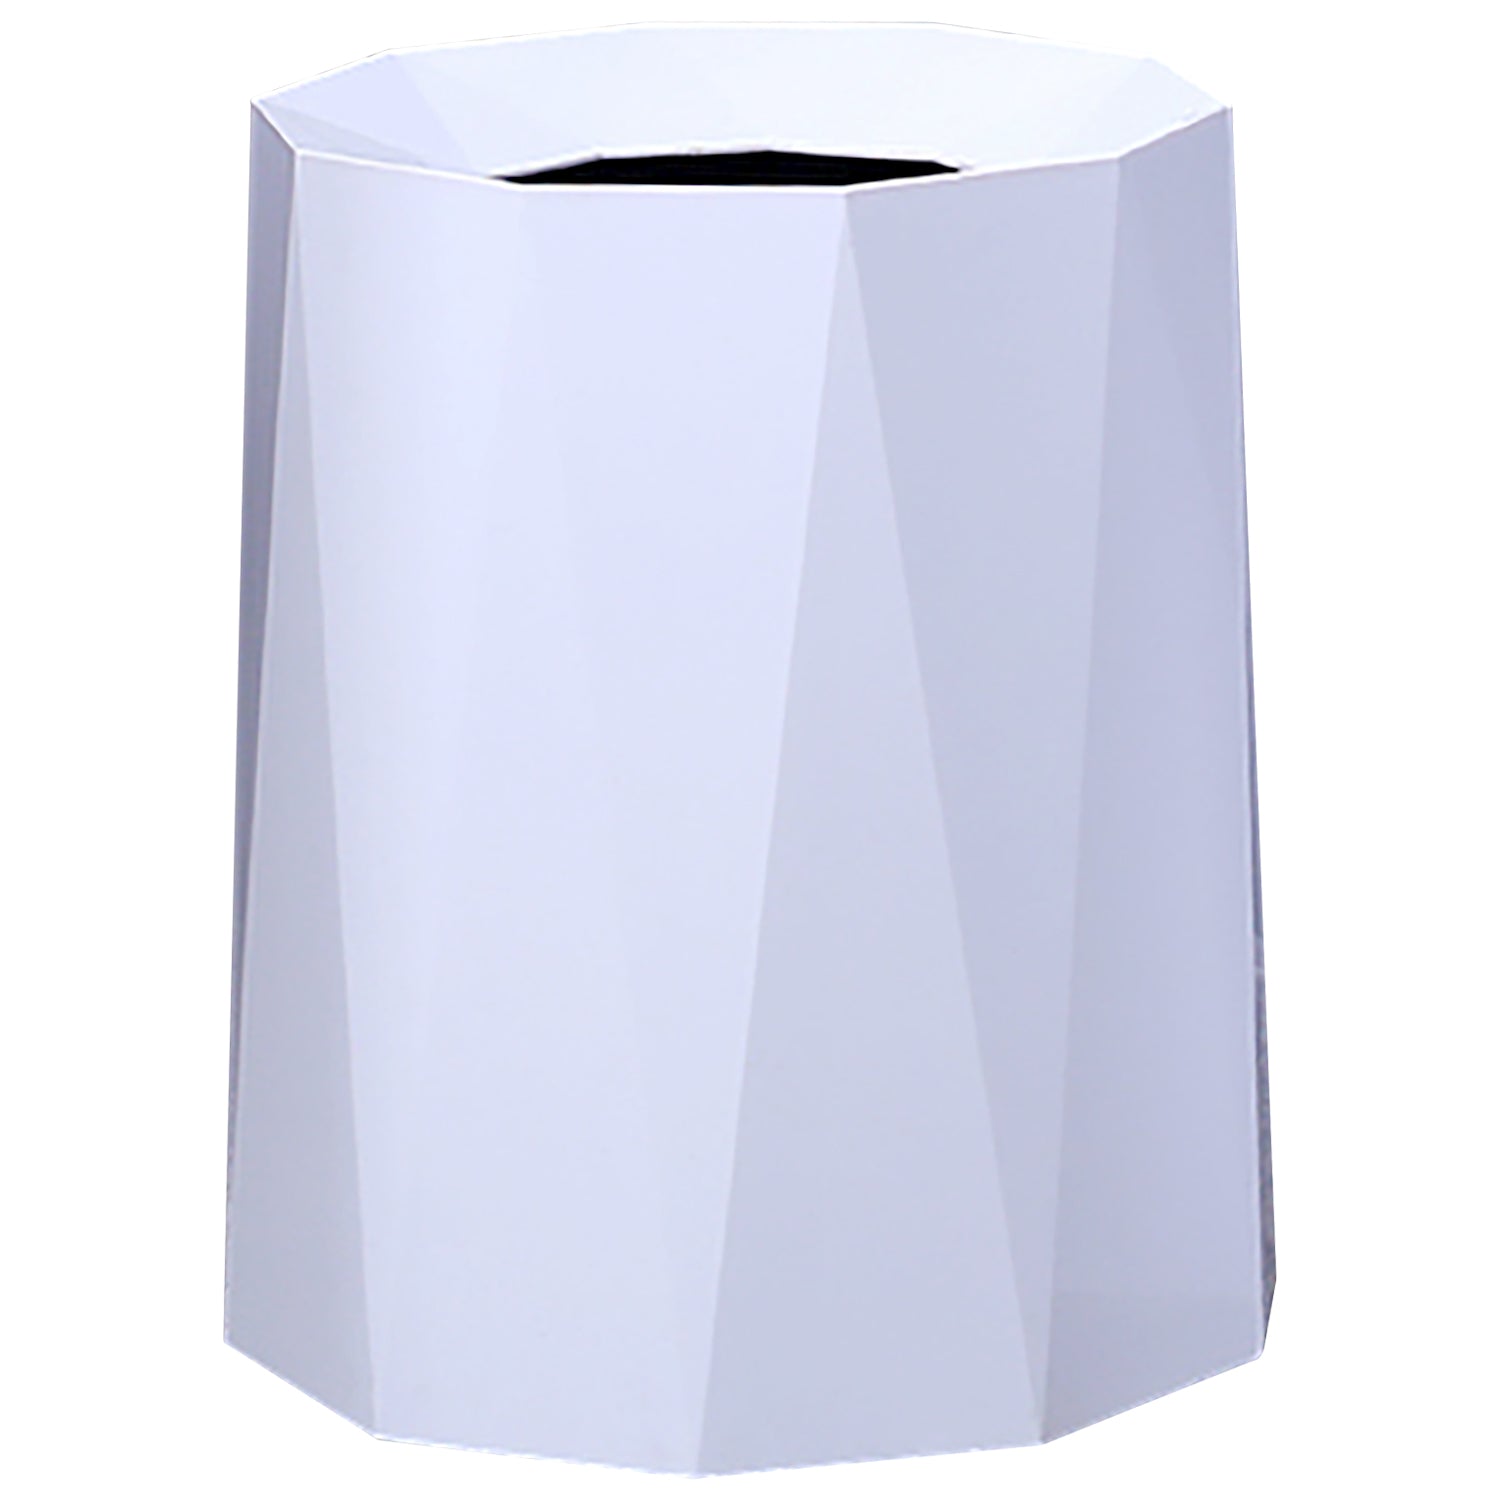 Load image into Gallery viewer, Geometric Modern Trash Can | Luxurious Nordic Trash Can Diamond Cut Designer Home